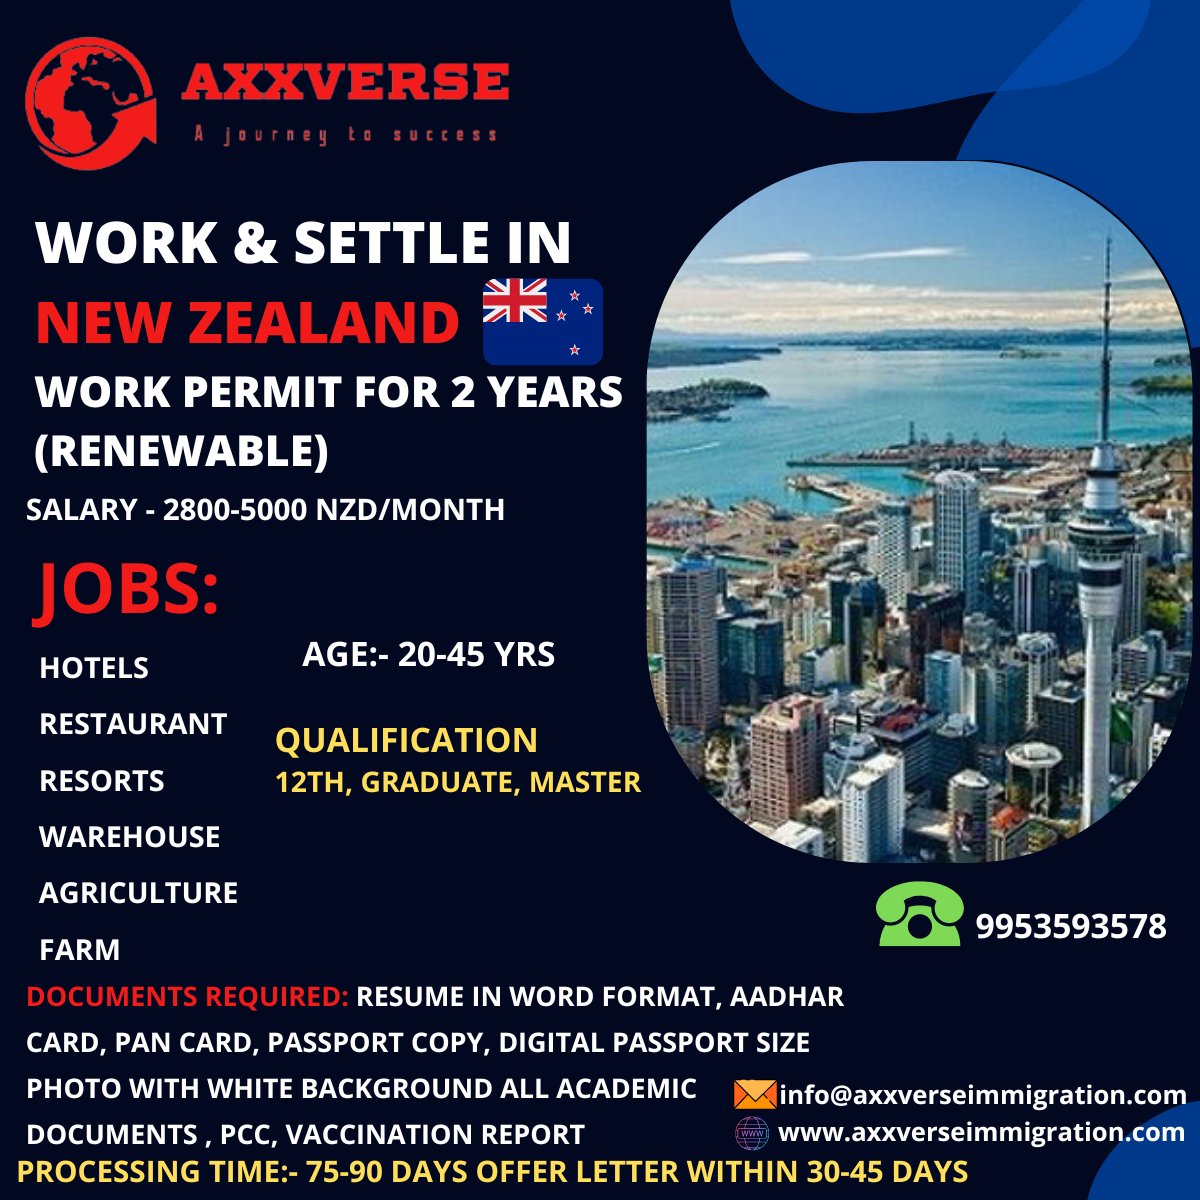 Discover a world of opportunities in New Zealand with a two-year renewable work permit. 🇳🇿🛠️ Embrace the stunning landscapes, vibrant culture, and friendly people while building your career. #WorkInNewZealand #SettleDownUnder #WorkPermit #JobOpportunities.